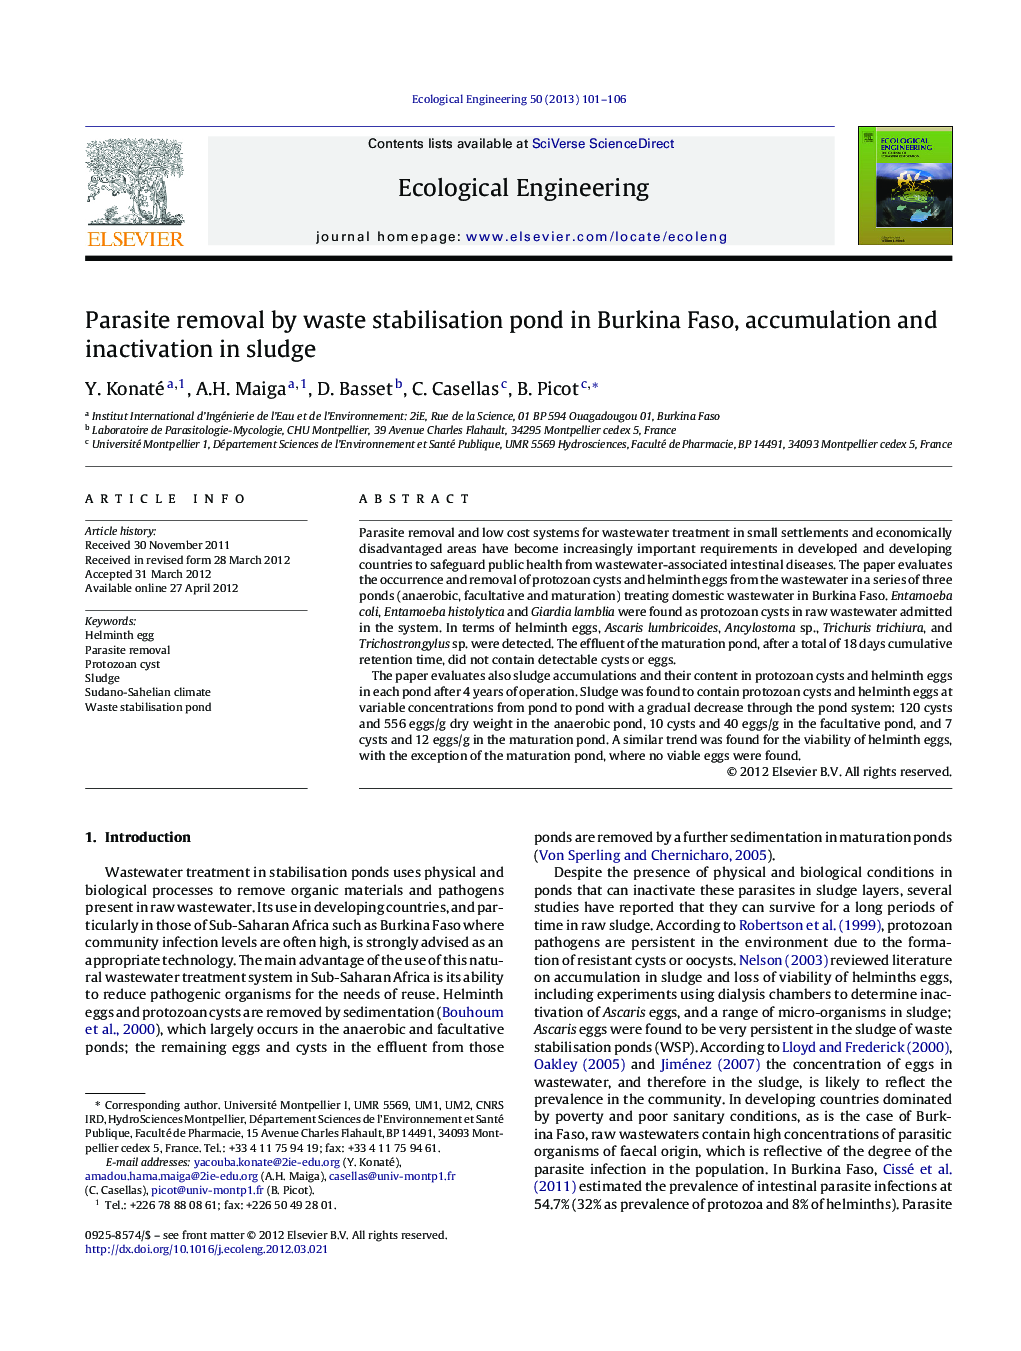 Parasite removal by waste stabilisation pond in Burkina Faso, accumulation and inactivation in sludge